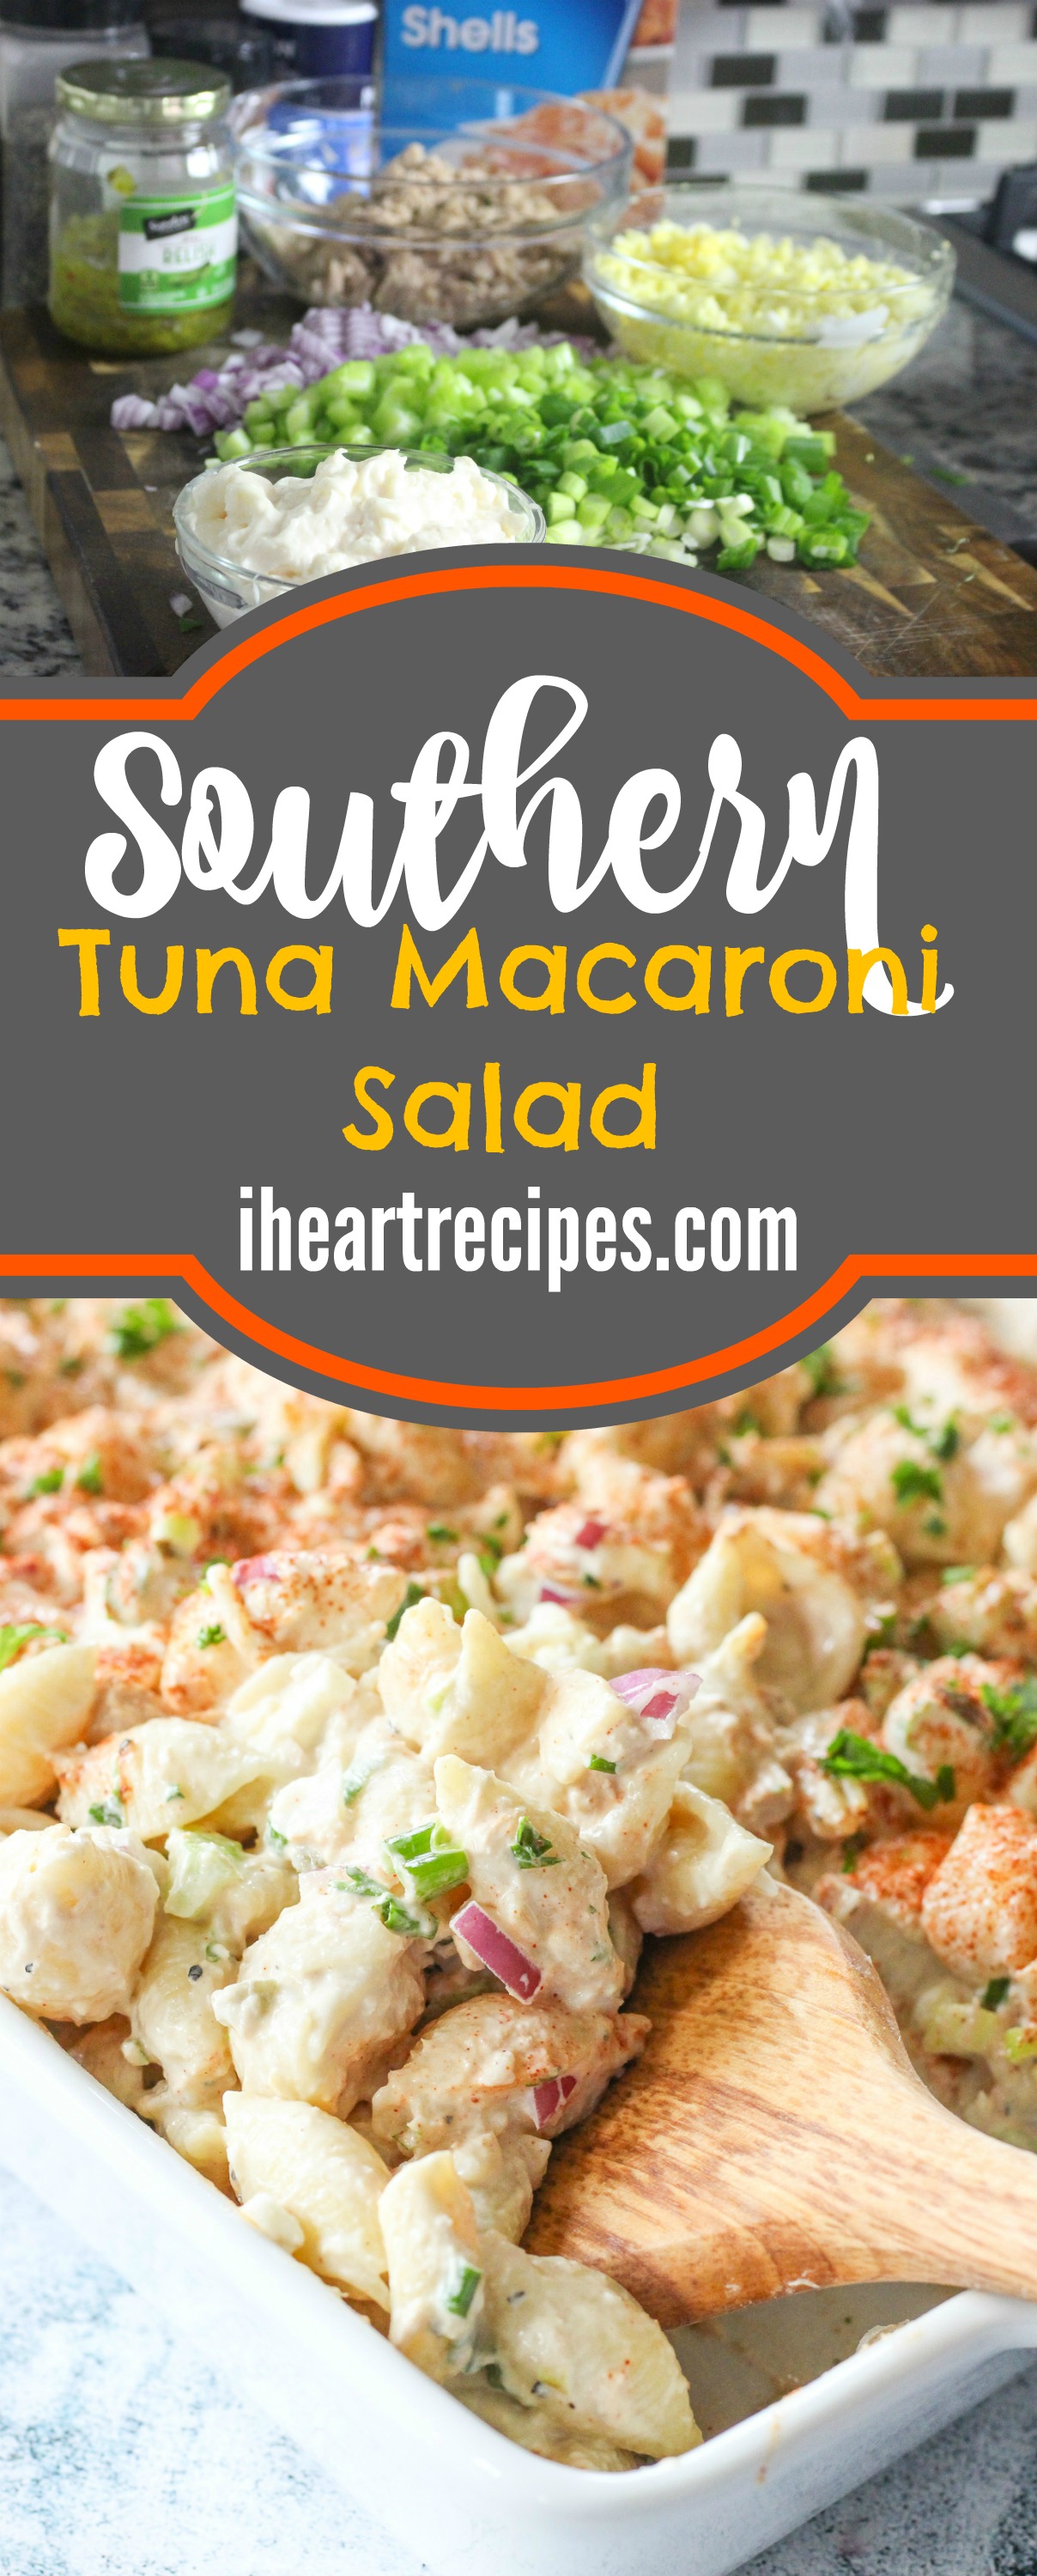 A collage of two images; the top image shows ingredients needed to make cold tuna macaroni salad. The bottom image shows the completed salad served in a white casserole dish. Text across the center of the image reads “Southern Tuna Macaroni Salad” and “iheartrecipes.com.”